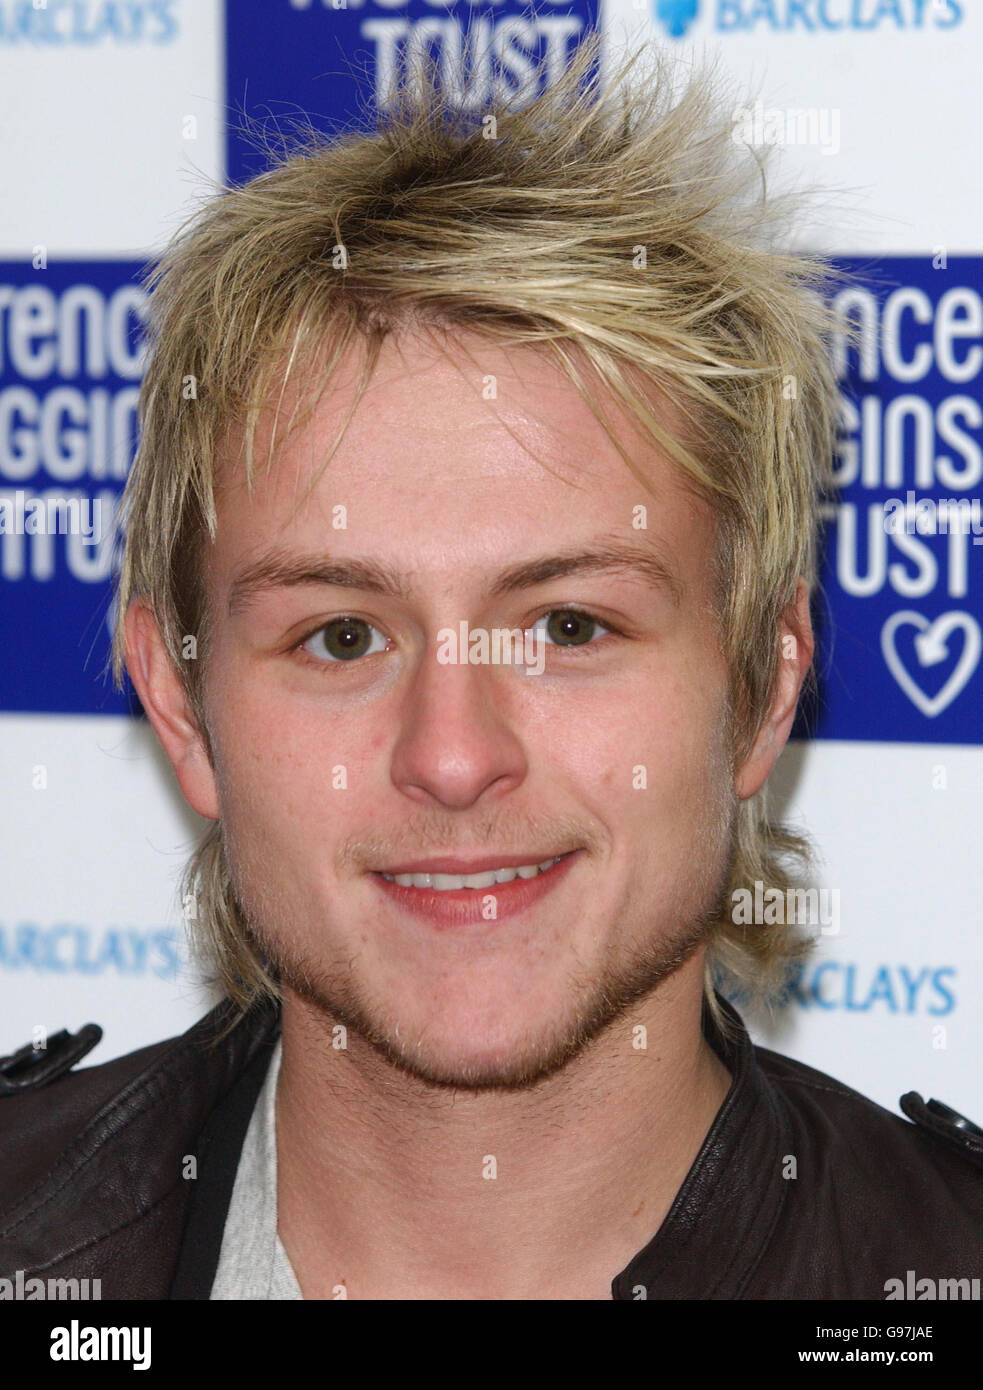 Hollyoaks actor Lee Otway during the 10th annual Lighthouse Gala Auction to raise funds for the Terrence Higgins Trust, at Christie's in central London, Wednesday 15 March 2006. PRESS ASSOCIATION Photo. Photo credit should read: Anthony Harvey/PA Stock Photo